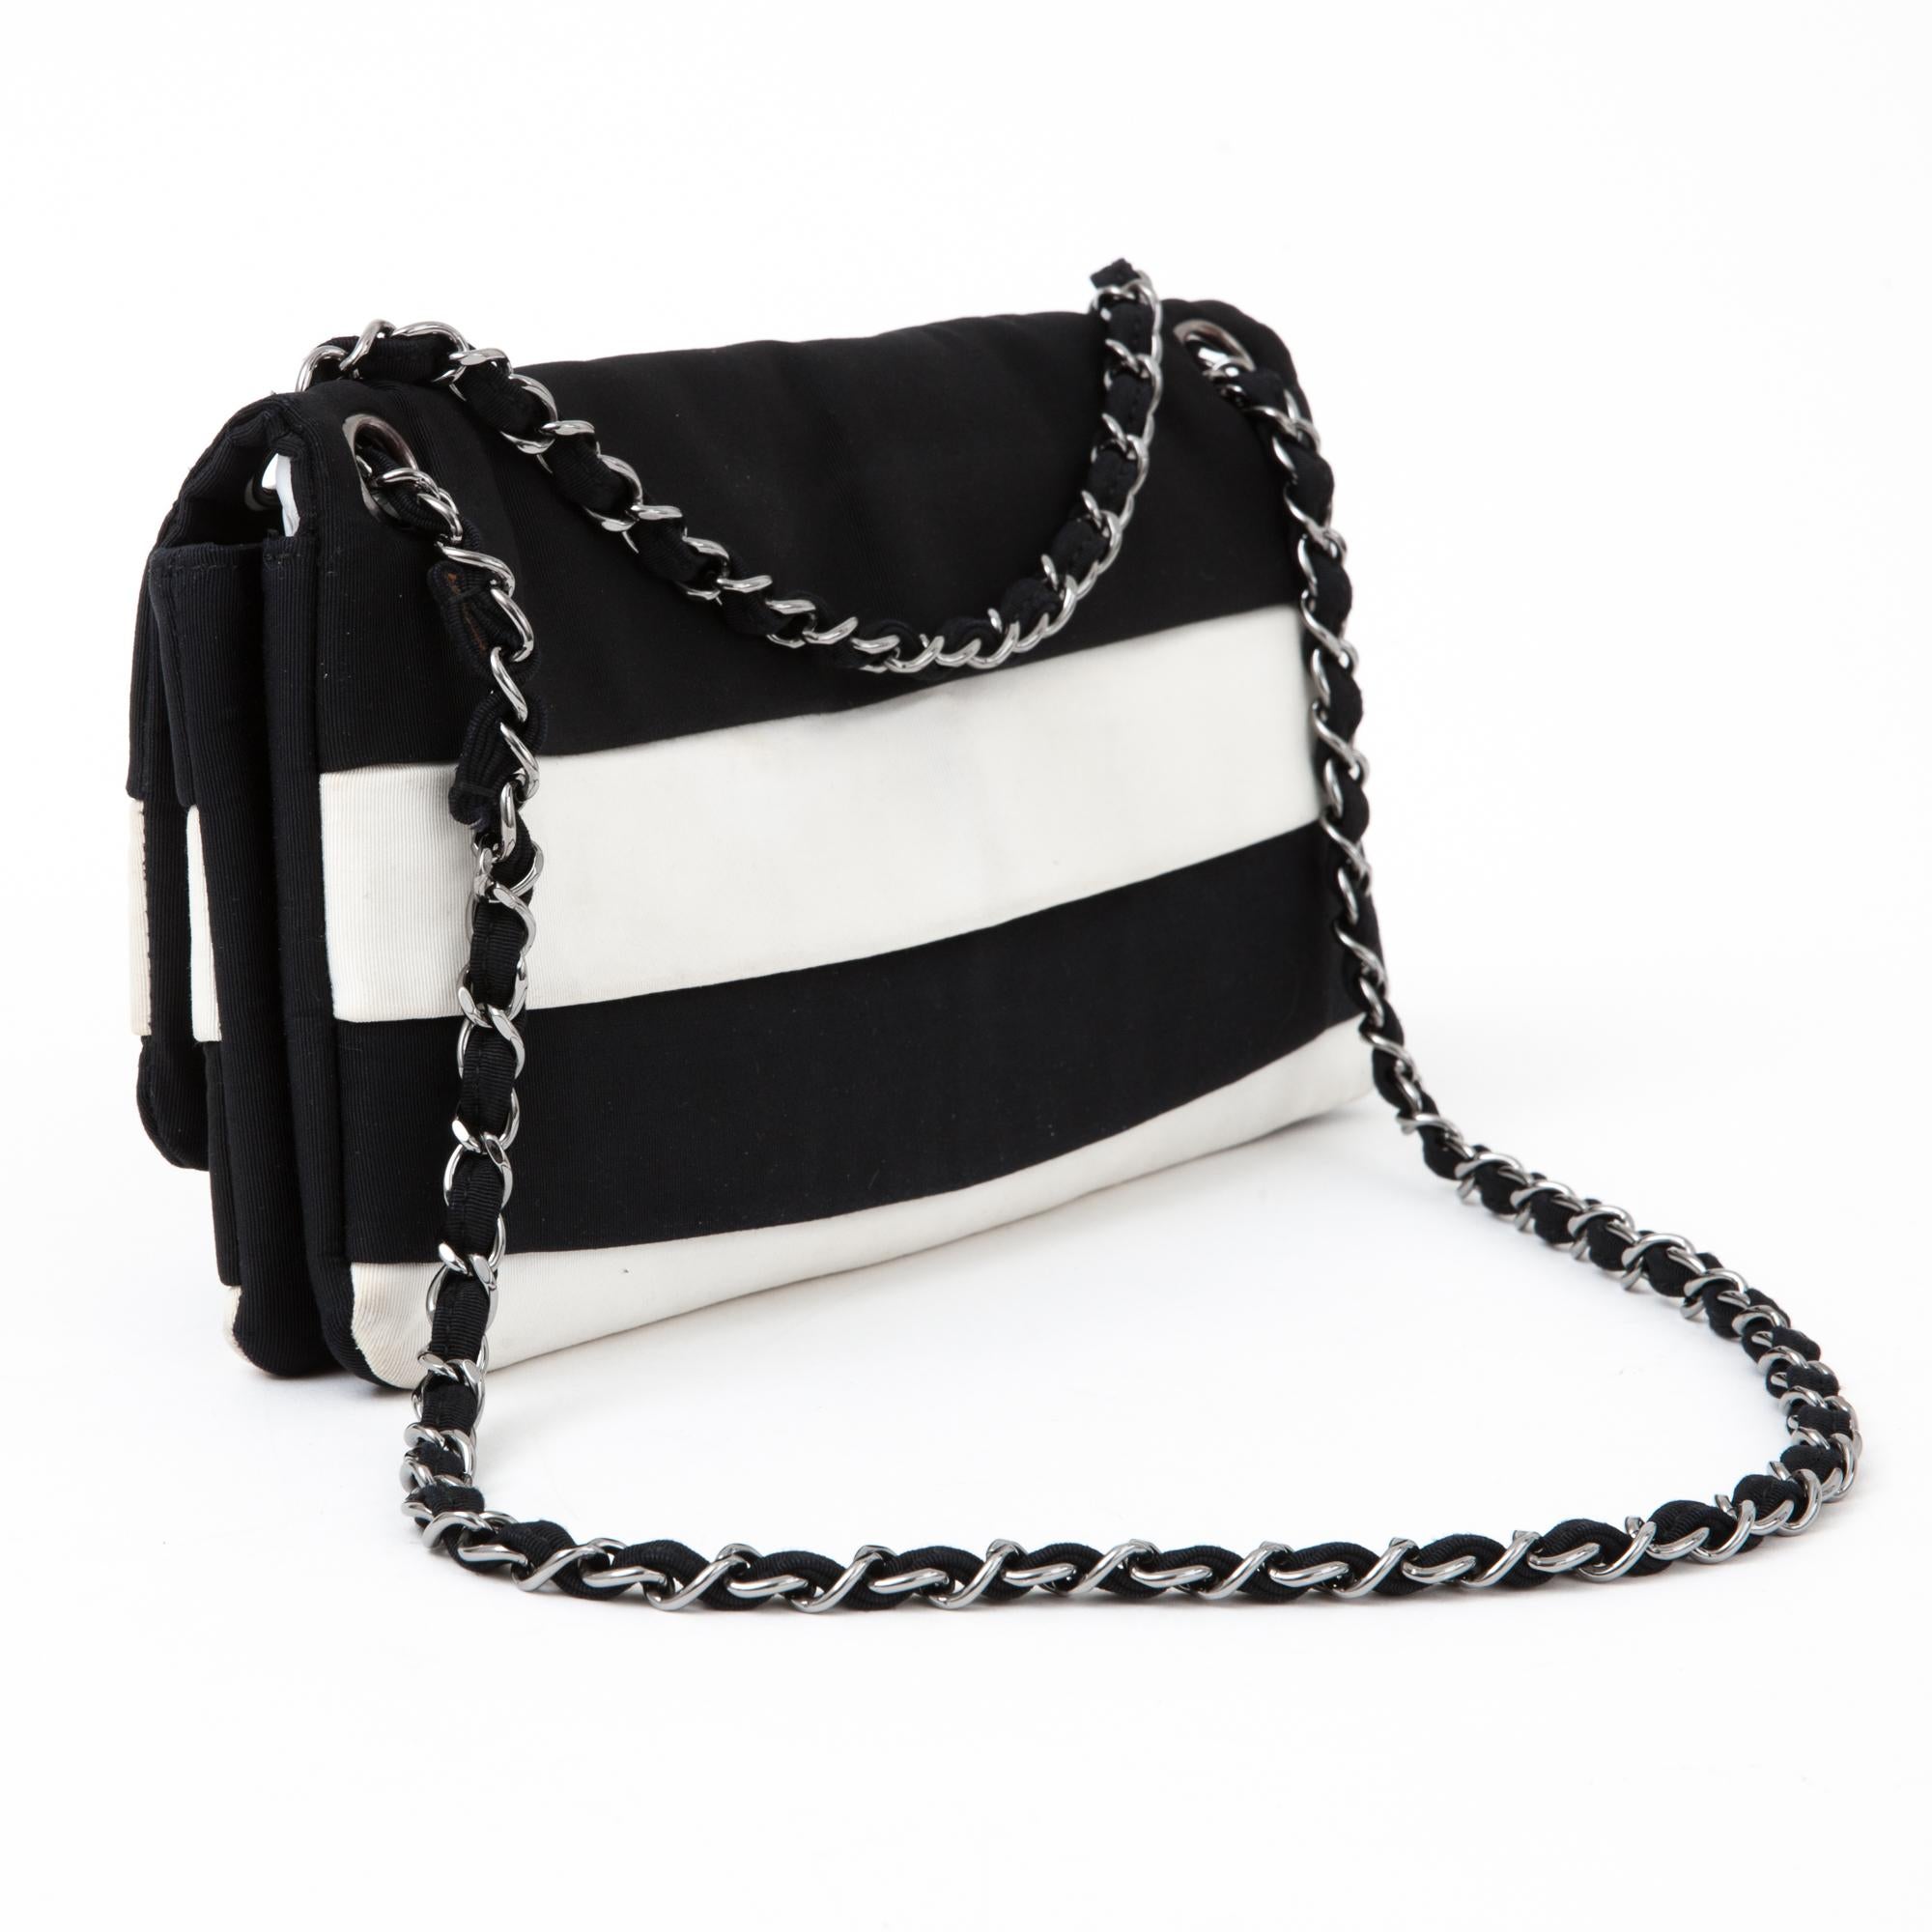 handbag Chanel 2.55 black and white striped fabric with silver buckle and clasp, two inner compartments and a zip pocket.
indicative dimensions
Width 28 cm, height 16 cm, depth 3 cm
Note the use of the tissue brands.
Sold with authenticity card and